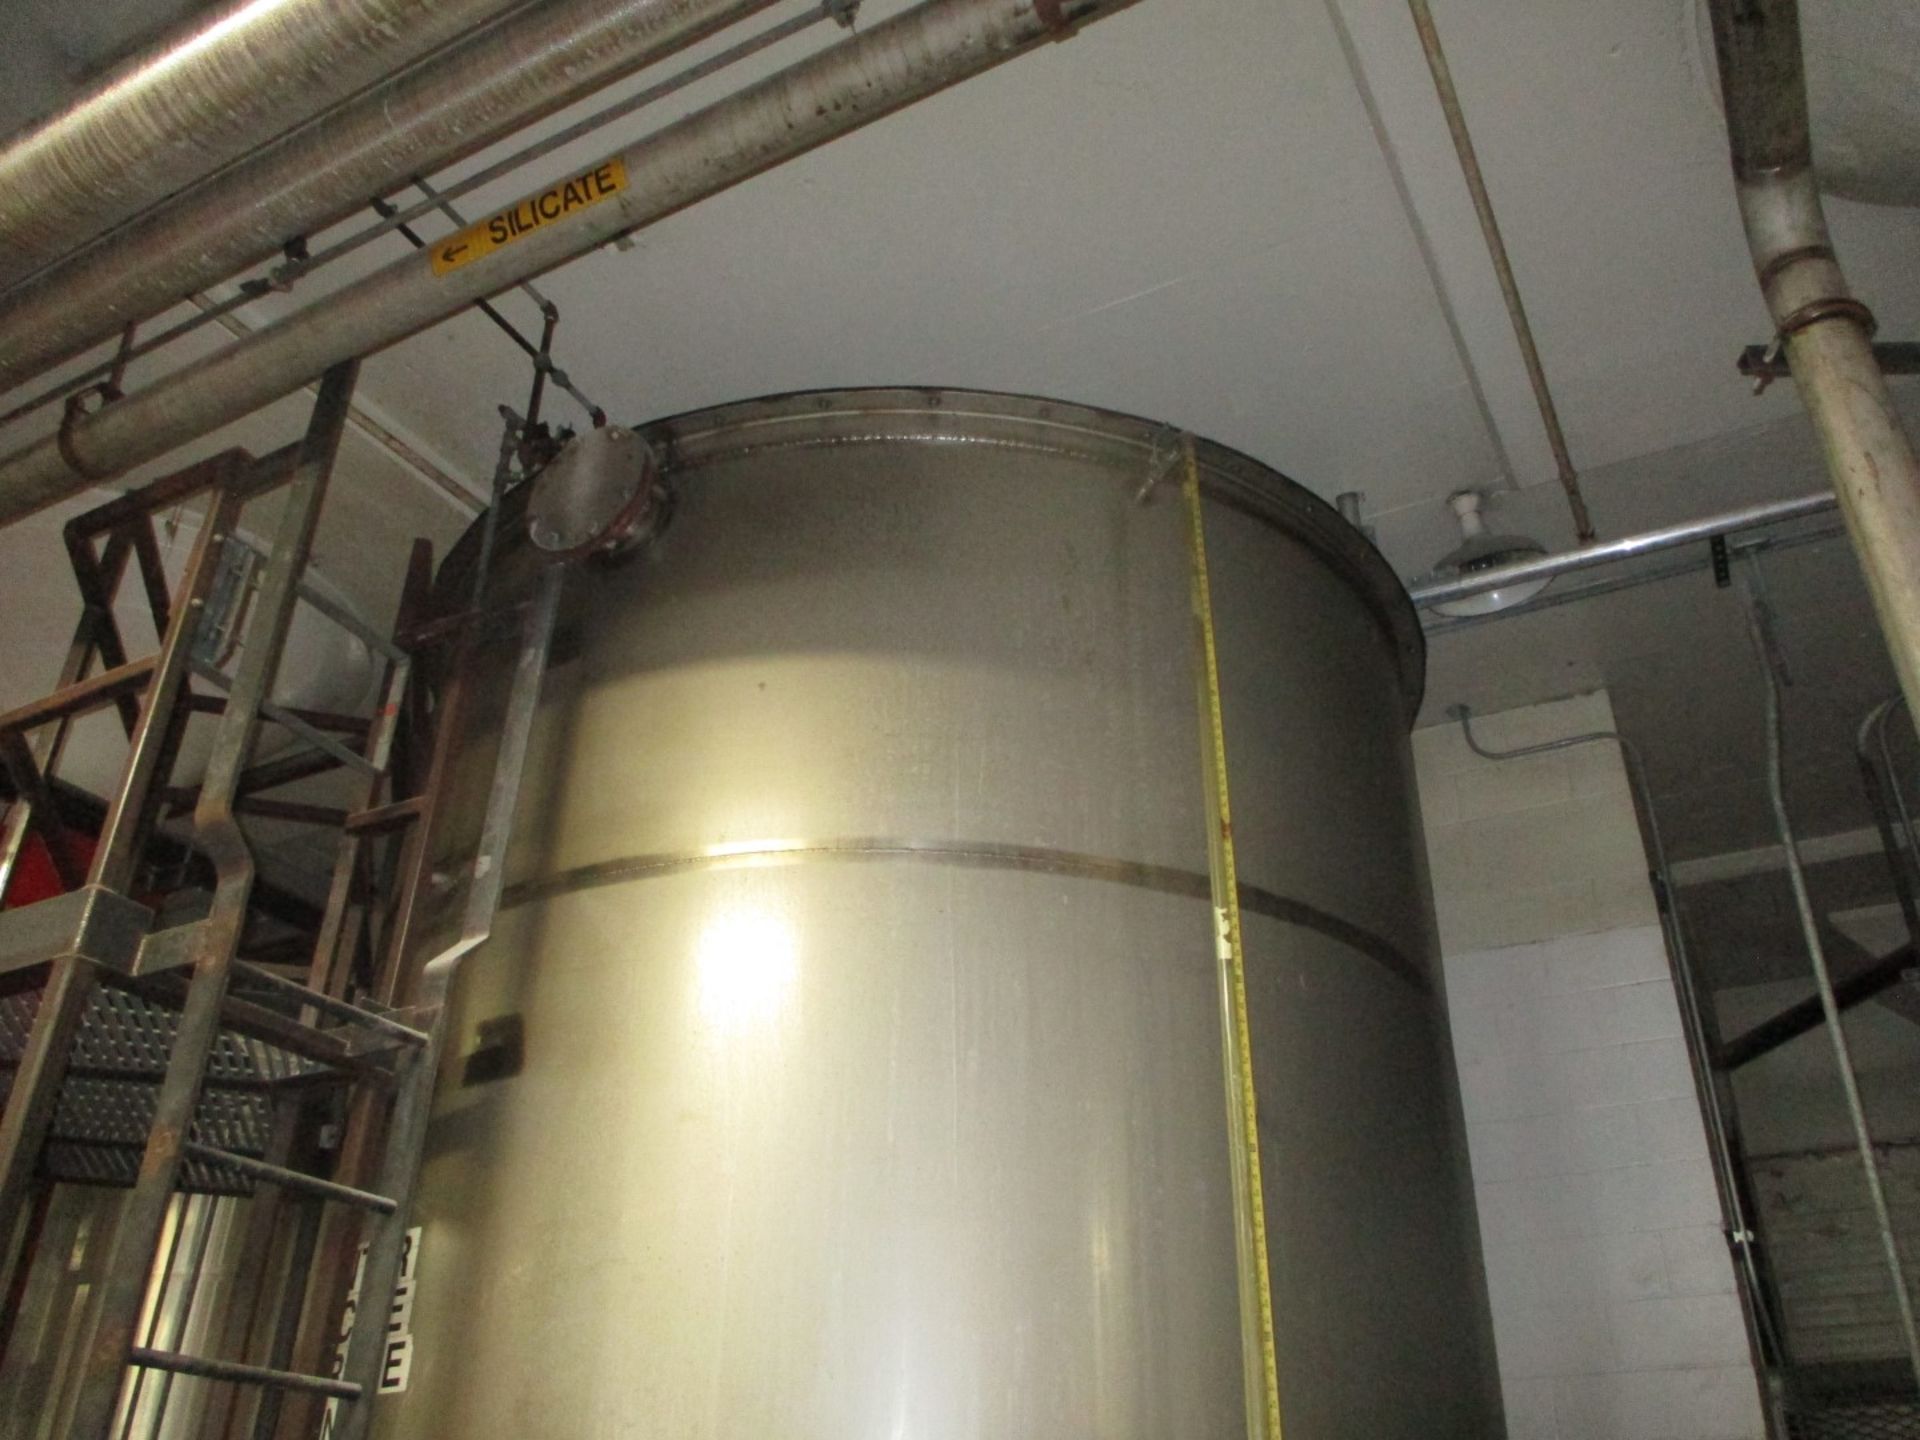 7500 Gallon Letco Tank, Stainless Steel Construction, Approximately 10' Diameter X | Rig Fee $3500 - Image 6 of 6